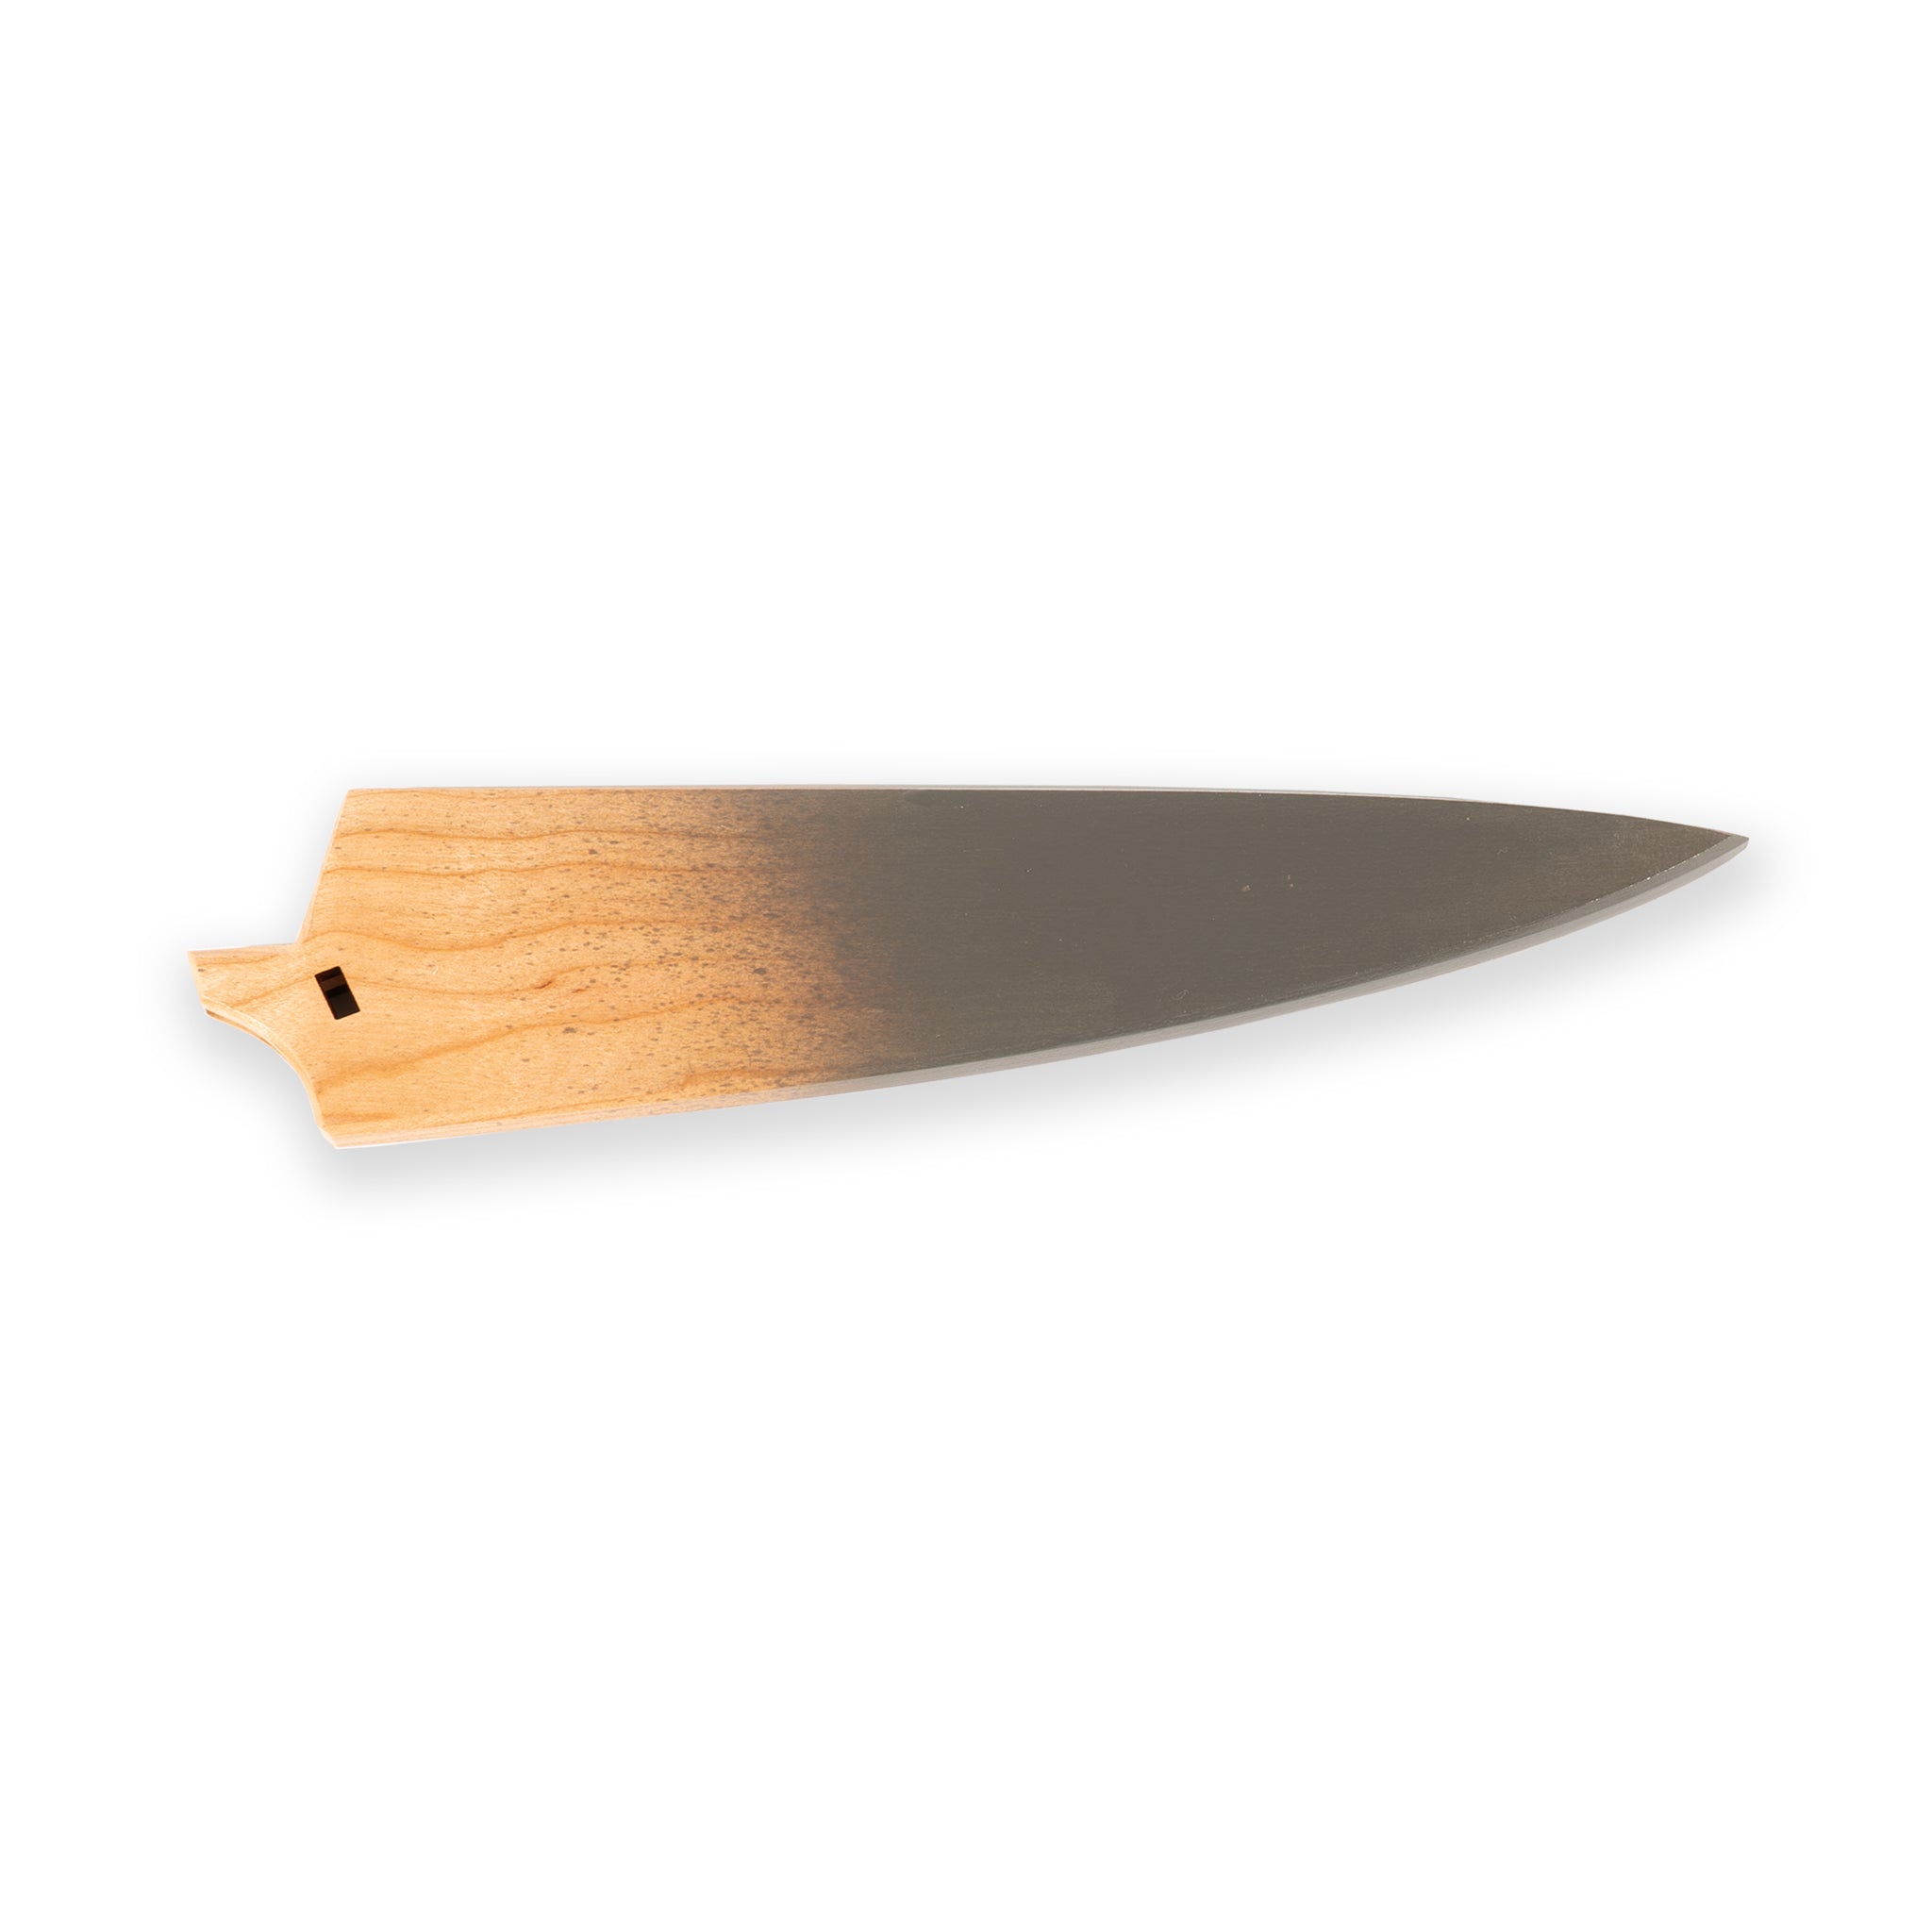 eXo Blue 7" Chef saya knife cover cherrywood with grey detail.